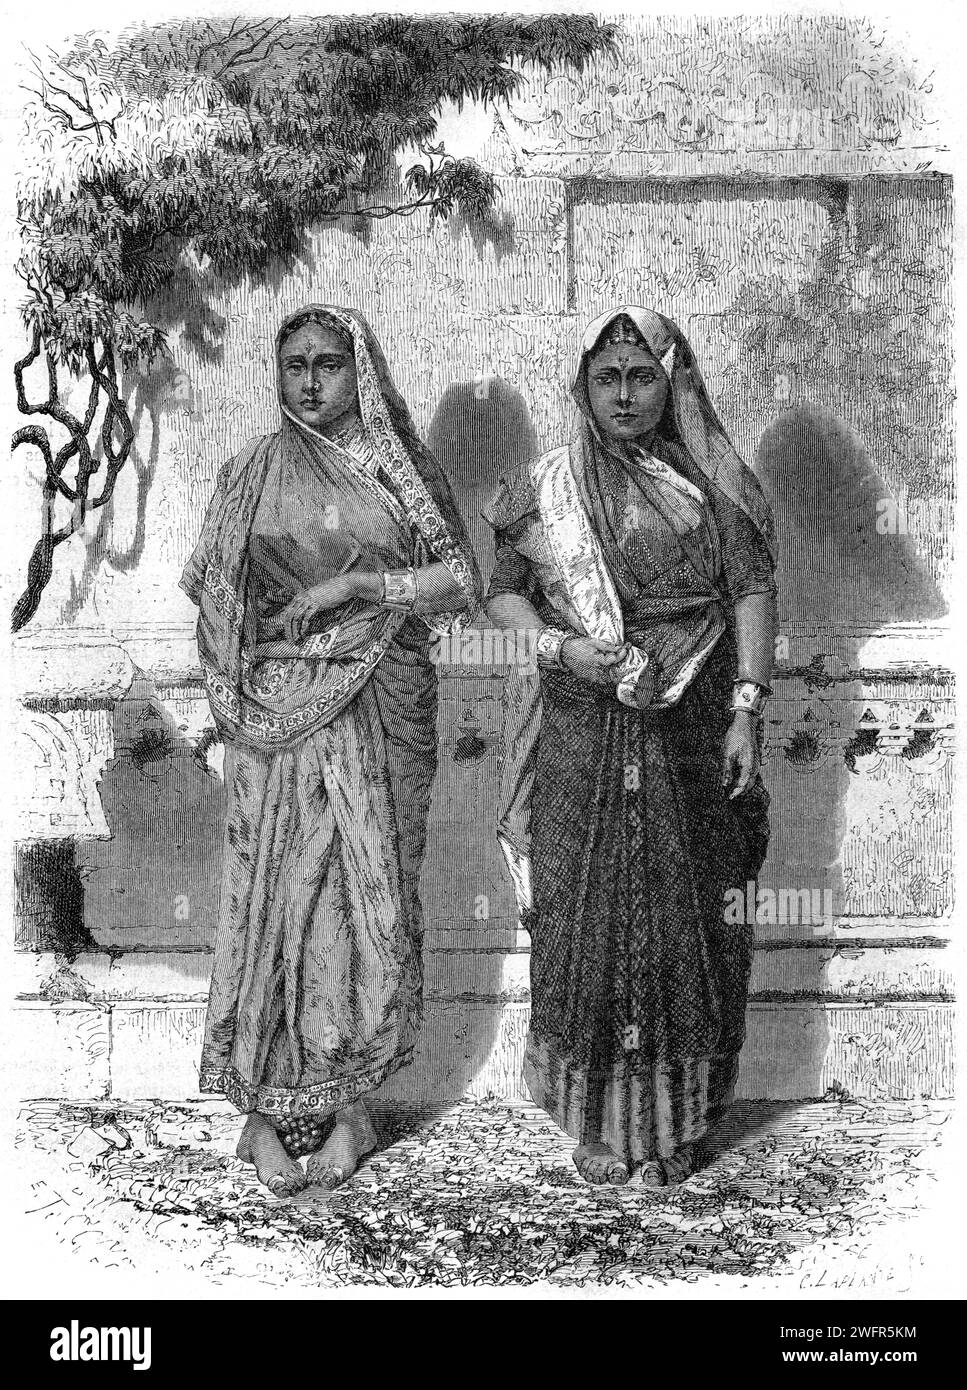 Low Cast Hindu Women known as Untouchables or Dalit, in Bombay or Mumbai India. Vintage or Historic Engraving or Illustration 1863 Stock Photo